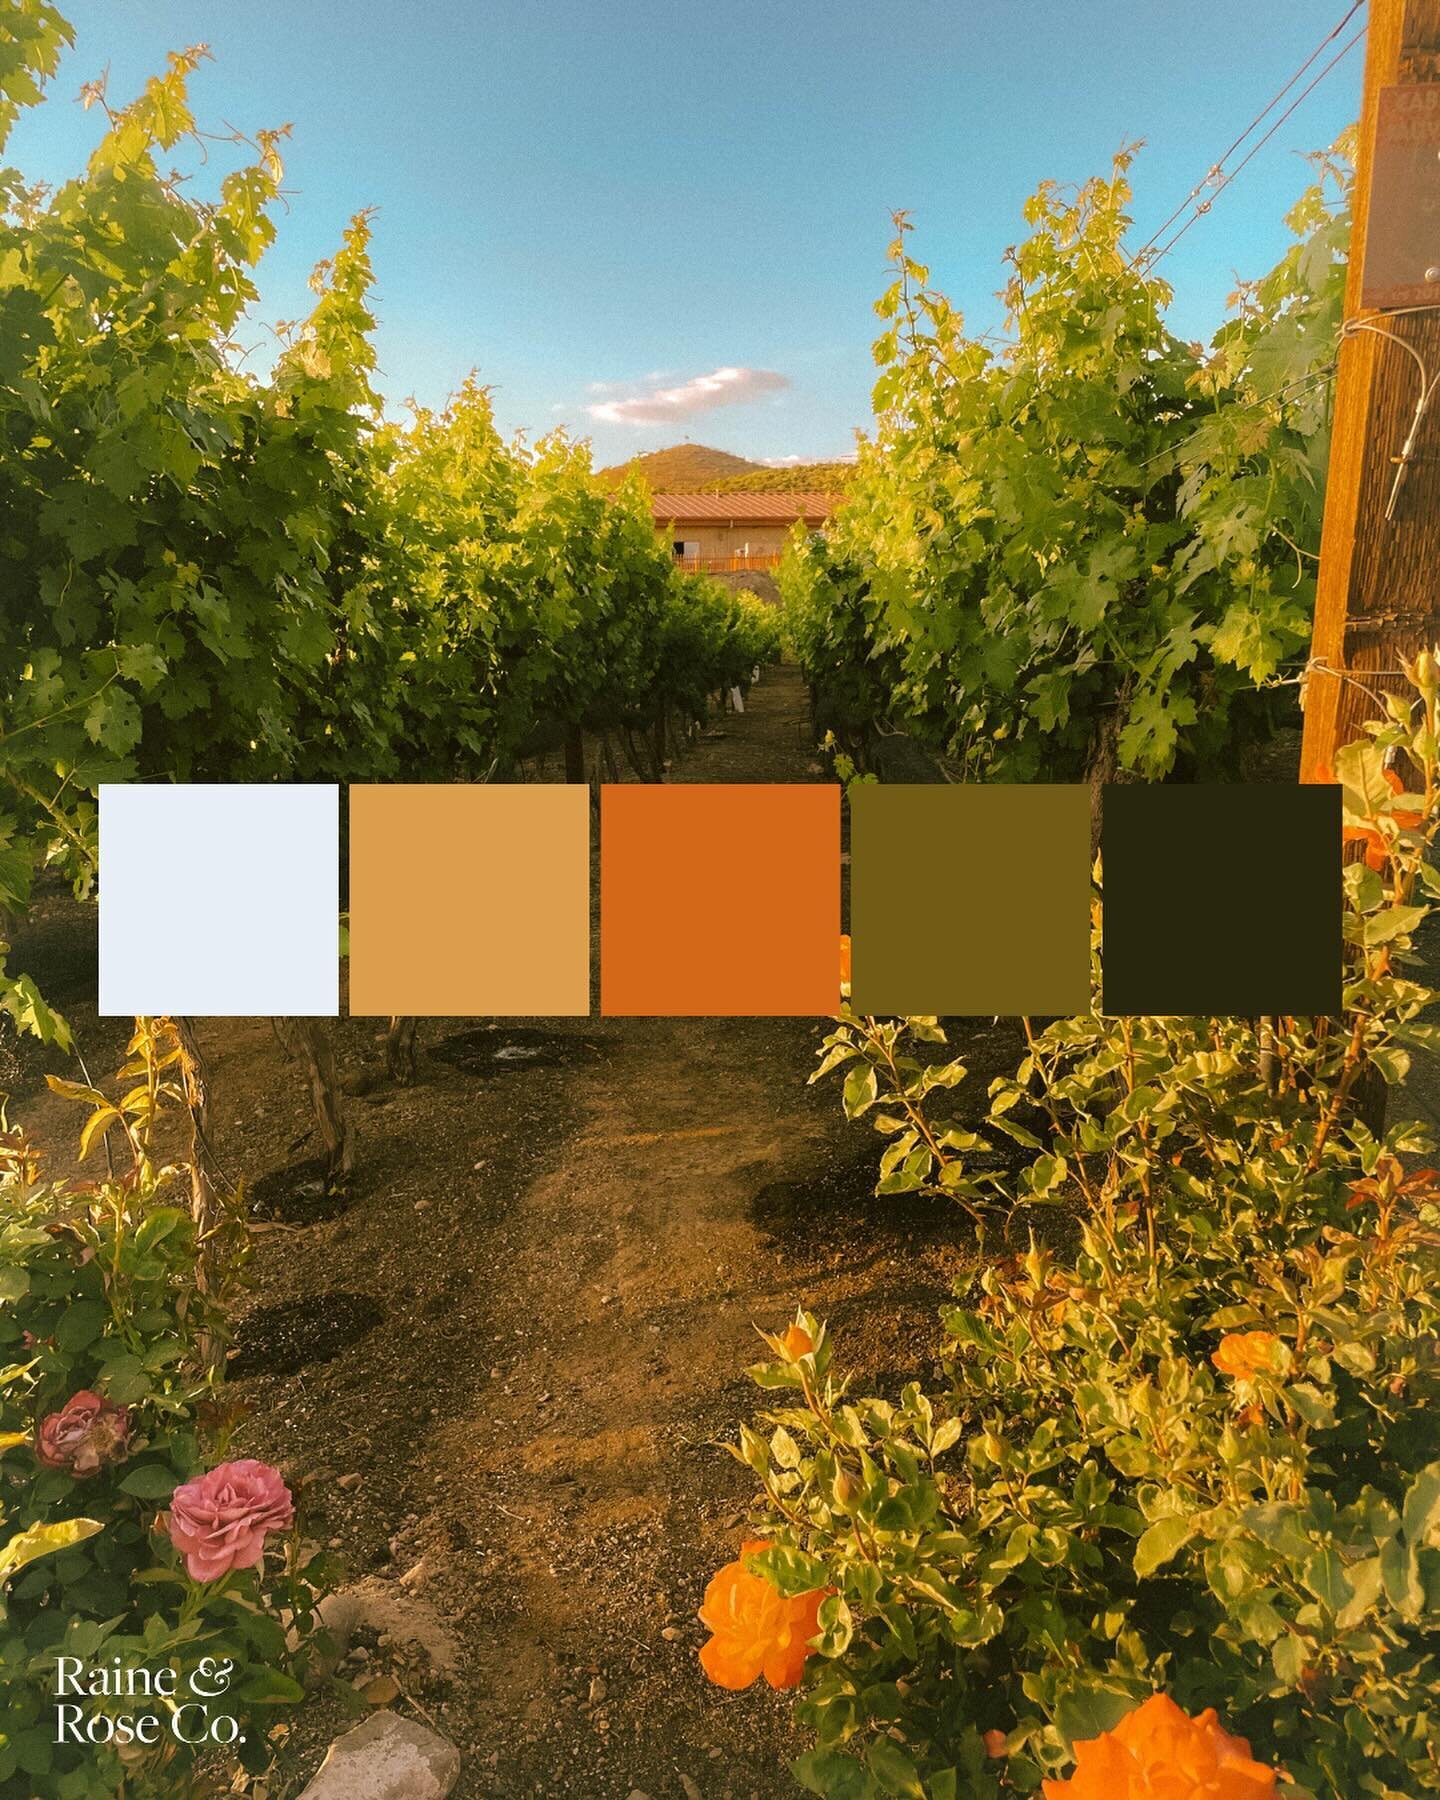 🌞Vineyard Glow🌞 This palette is perfect for brands wanting to offer their customers a sunny, enlivening experience with products that transport and encourage deep connection&mdash;with others, with nature, or even with both!

Where does this palett